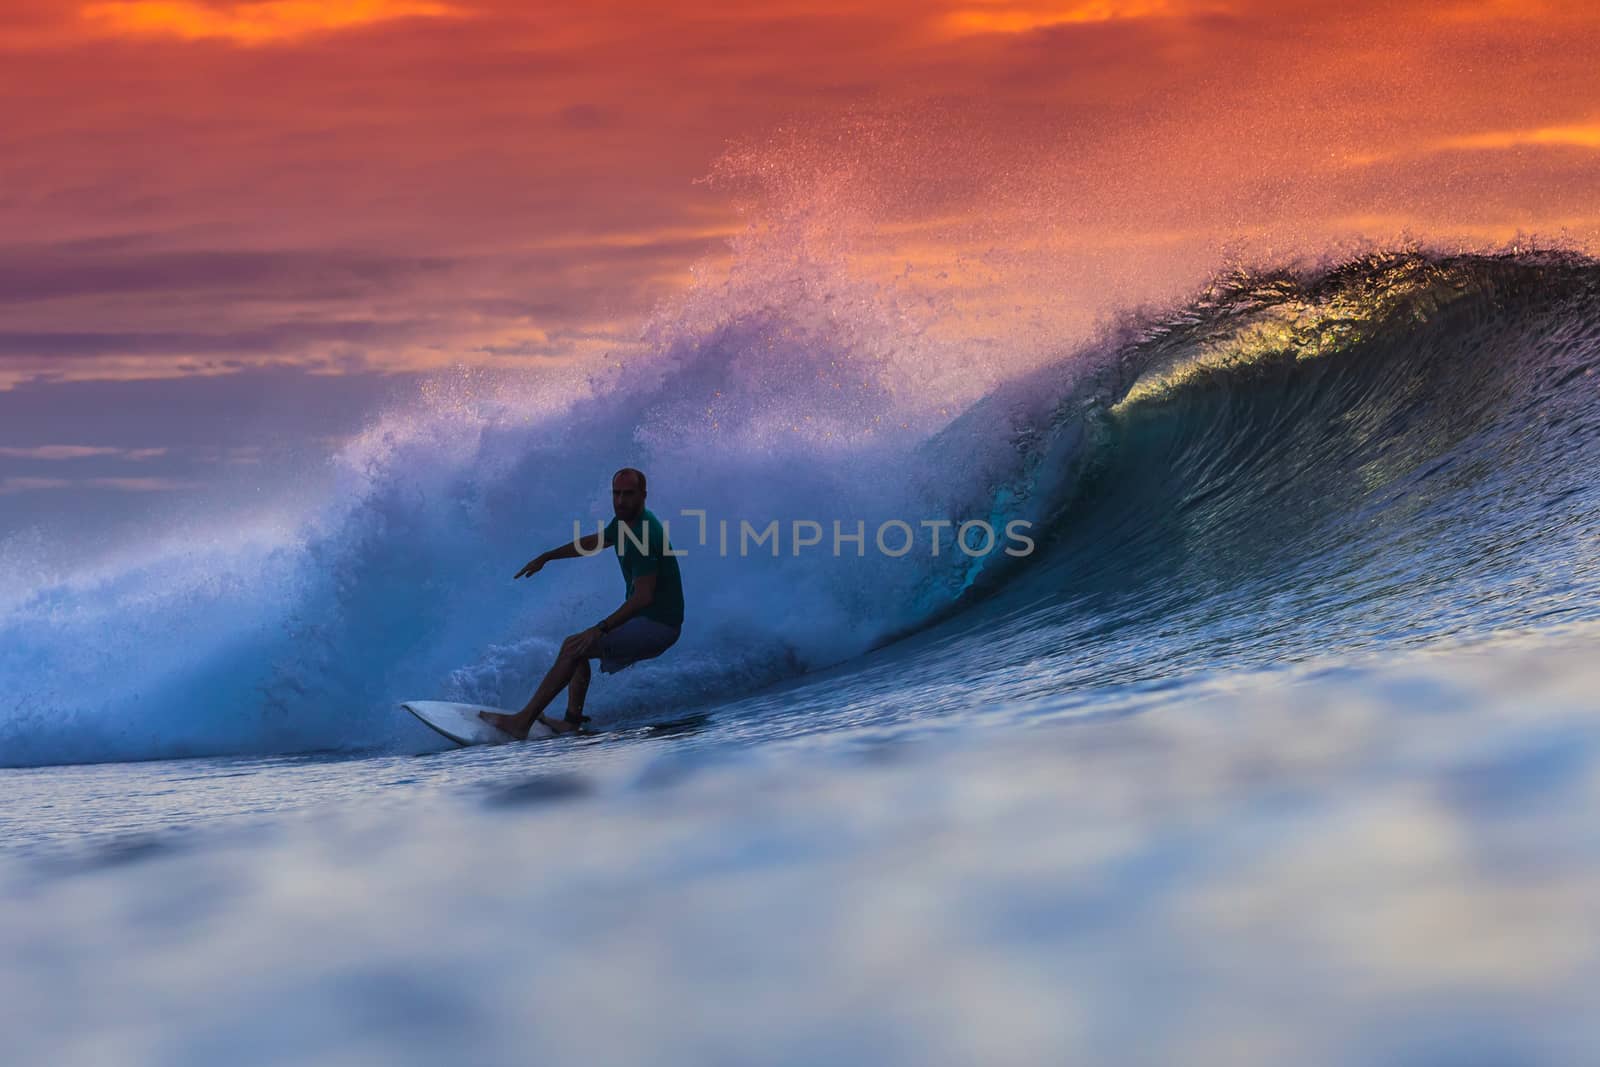 Surfer on Amazing Wave by truphoto